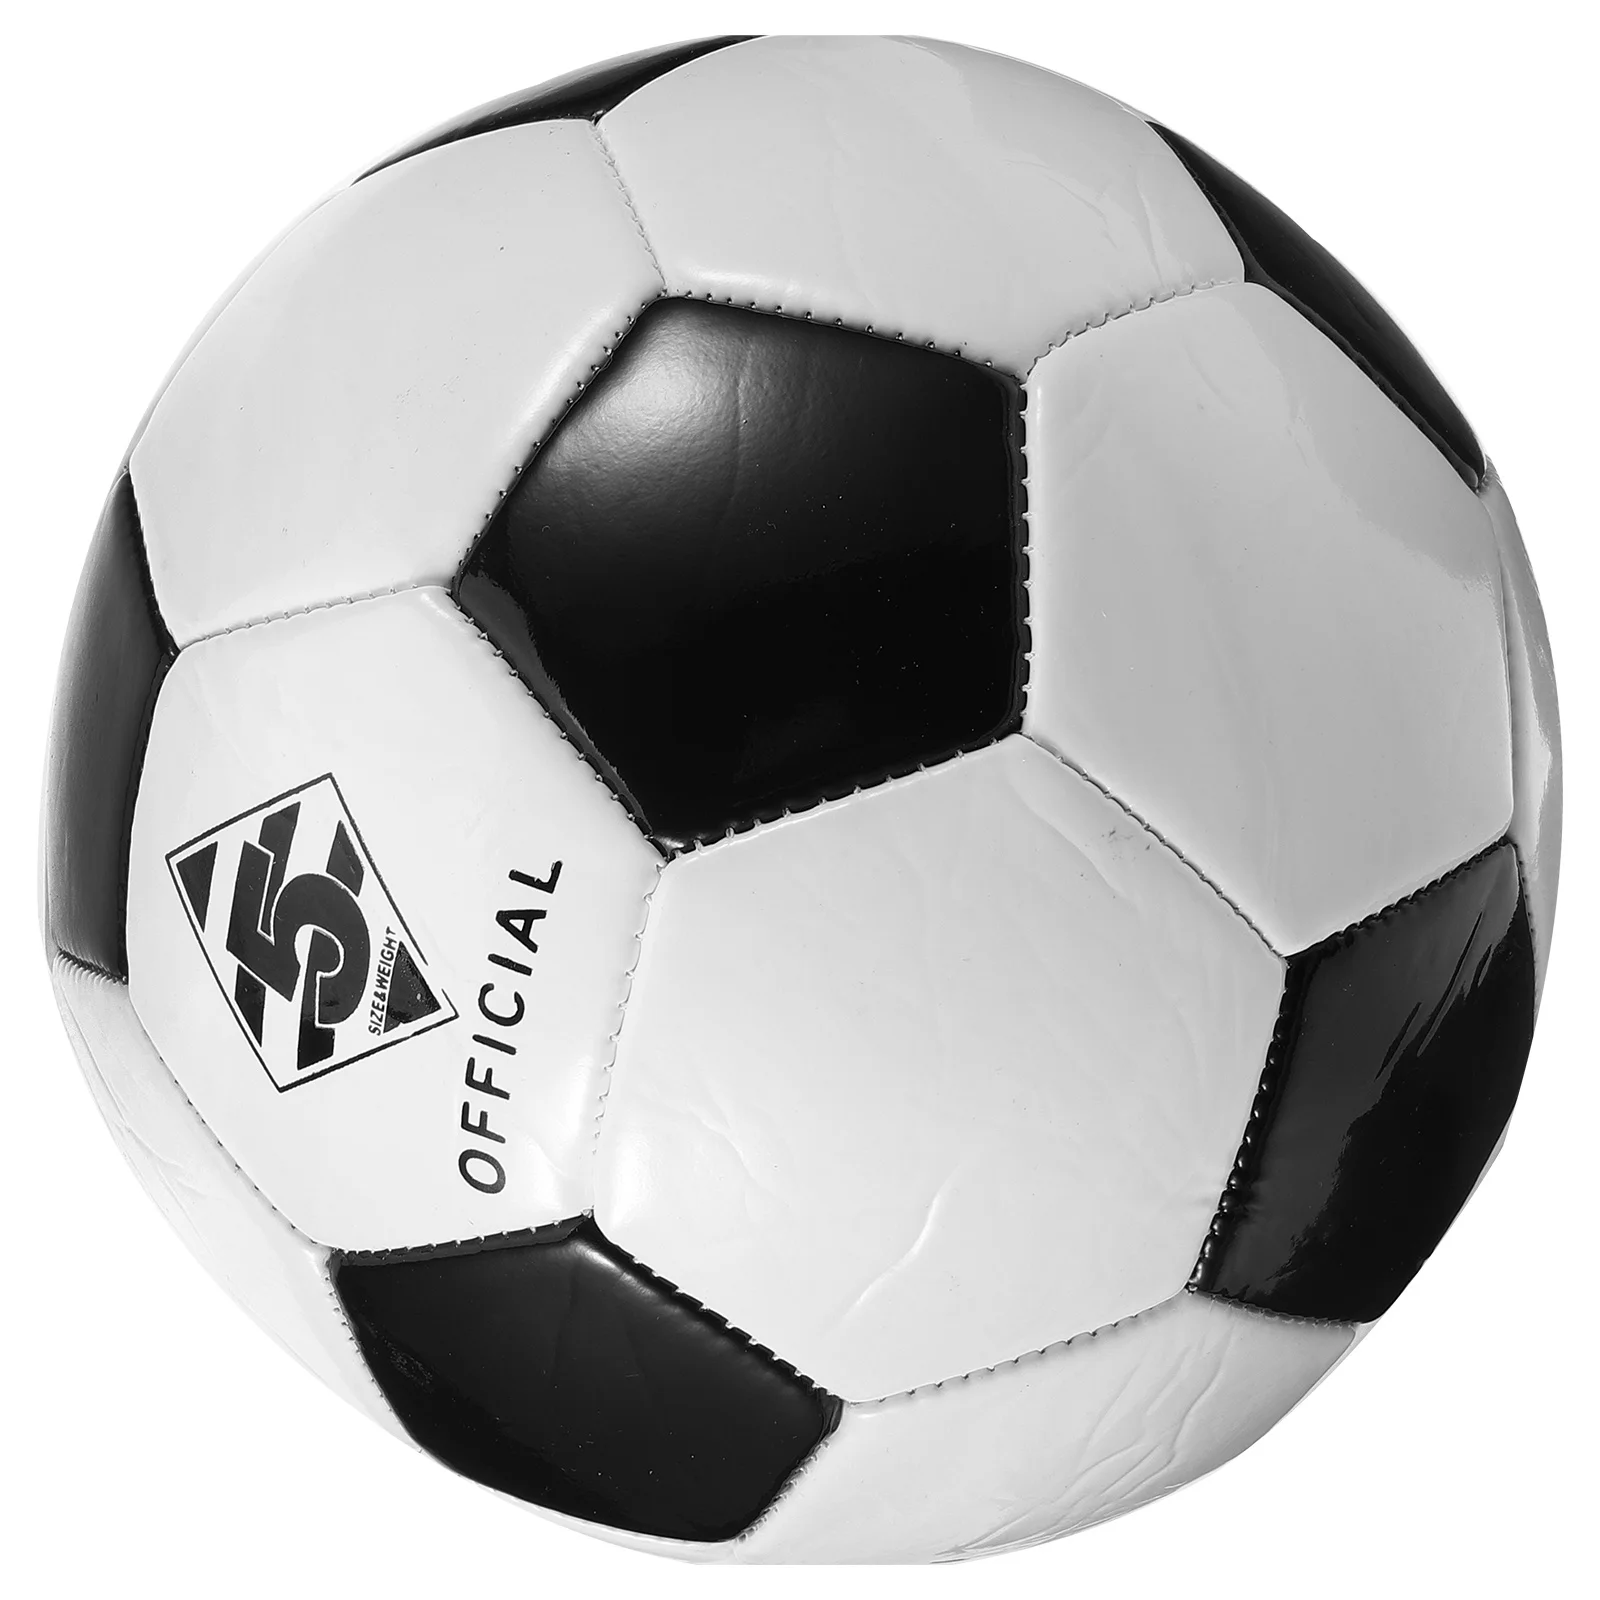 

Match Competition Soccer Universal Training Soccer Ball Exercising Soccer Ball Adults Sports Ball